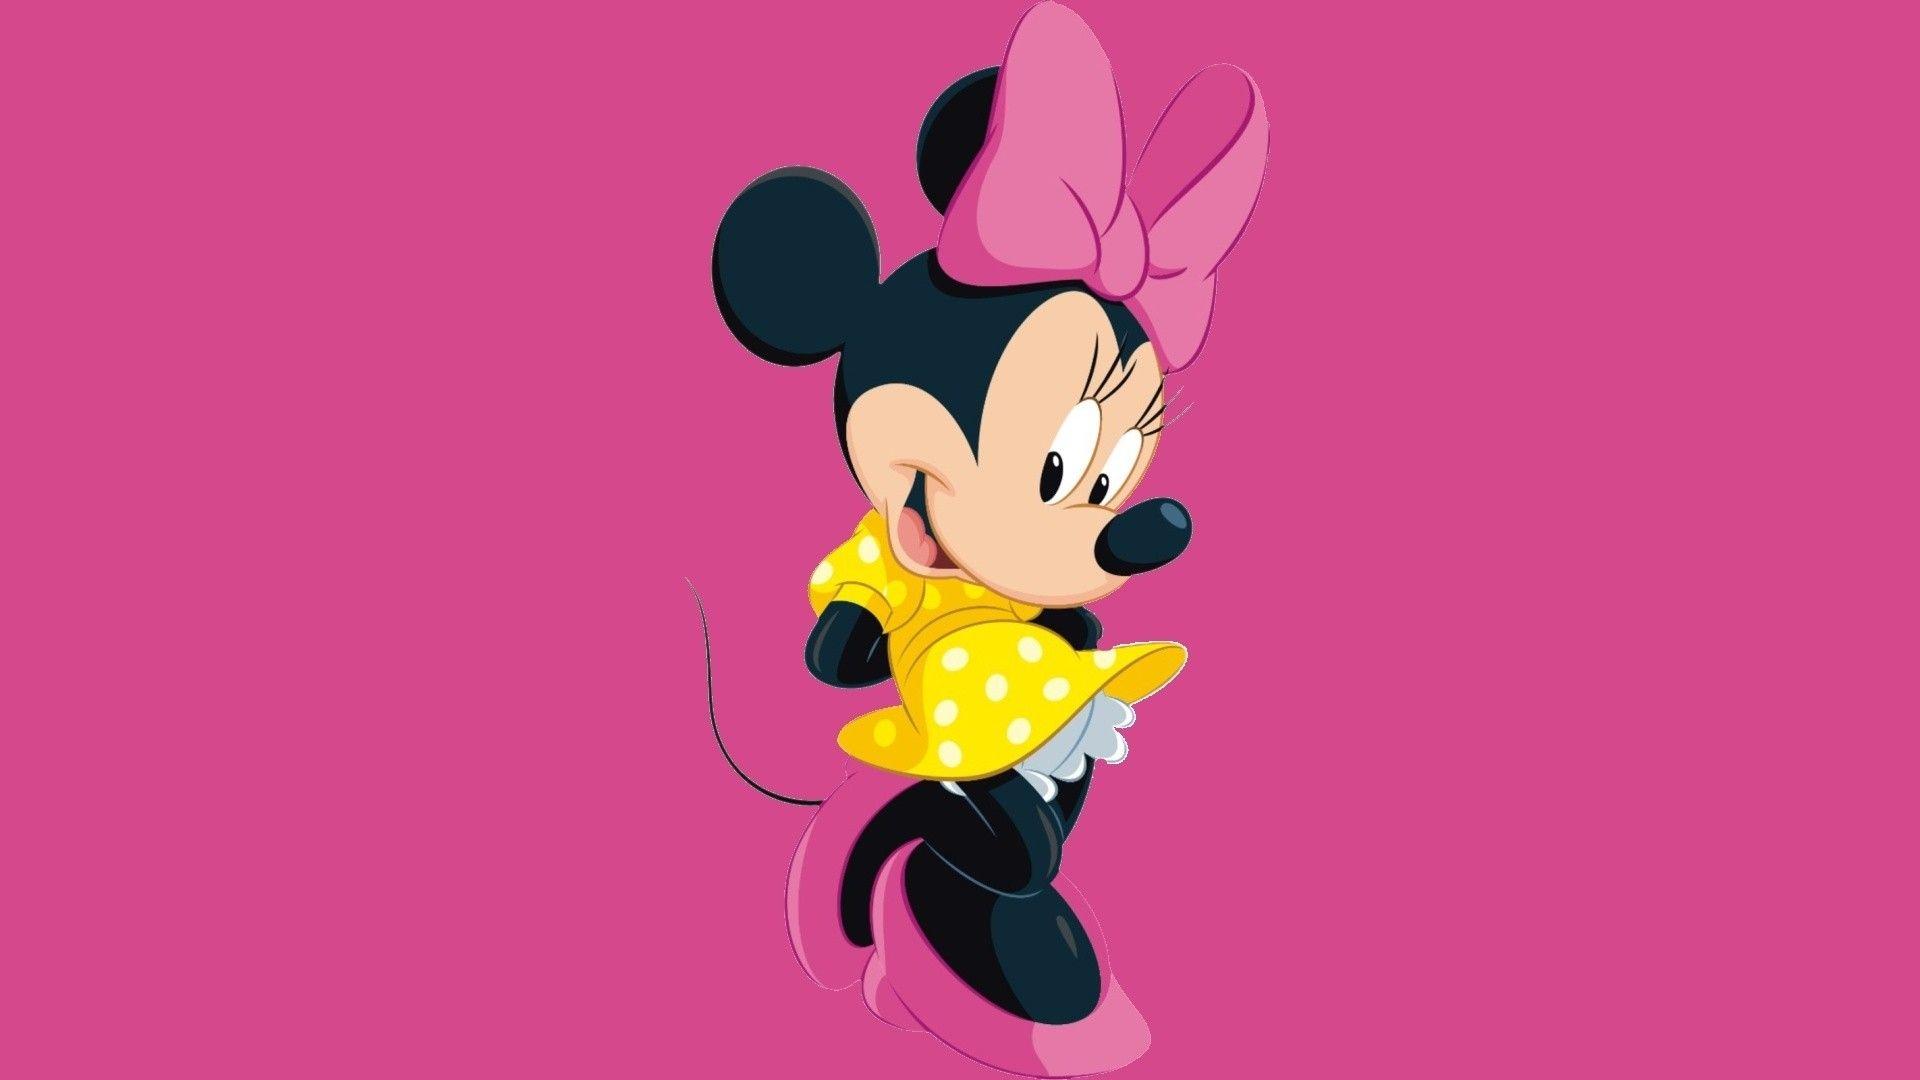 Minnie Mouse wallpaperDownload free awesome full HD wallpaper